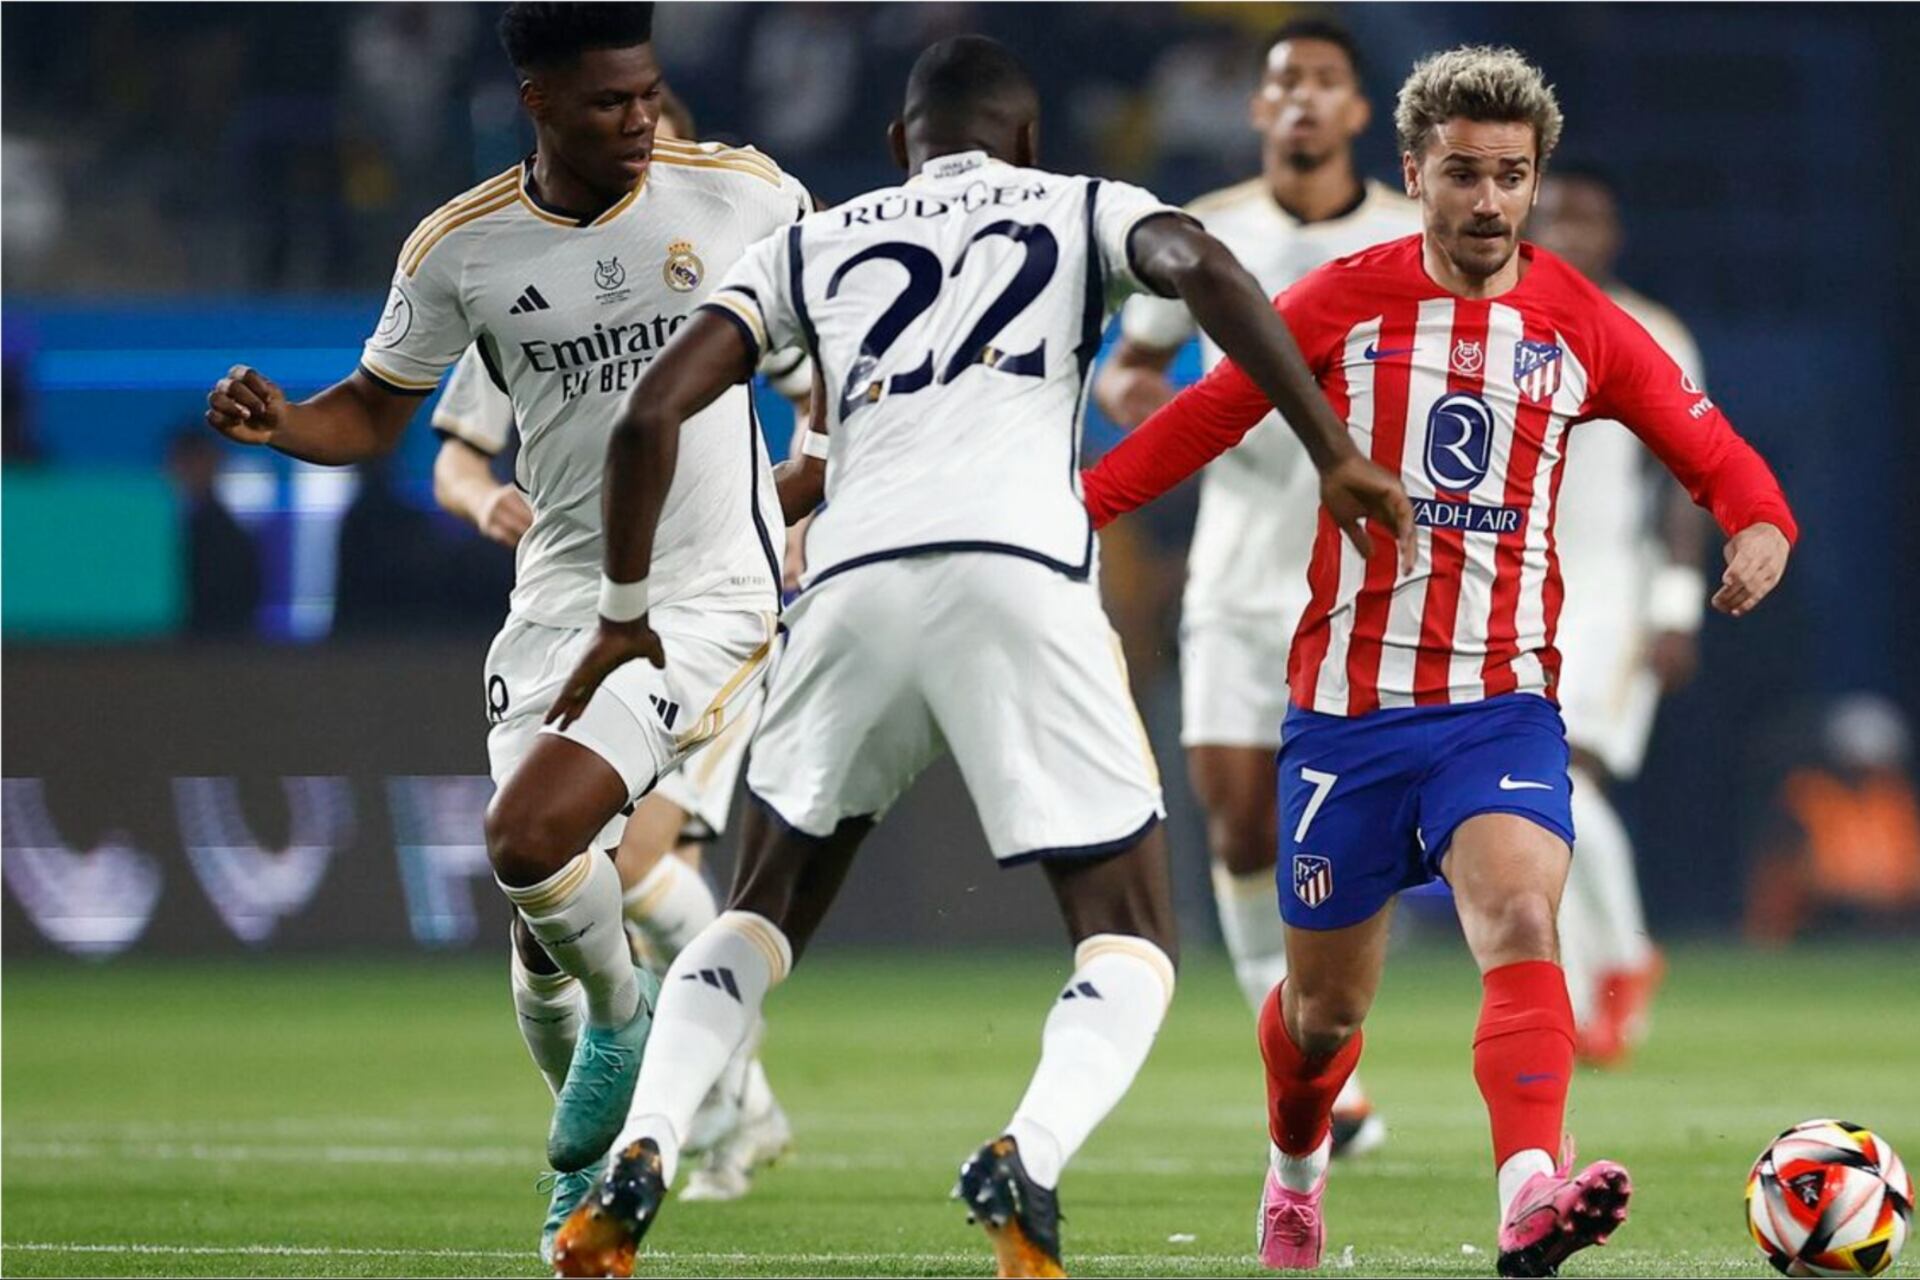 Real Madrid pays for saving millions by conceding early in Super Cup semifinal against Atletico Madrid 